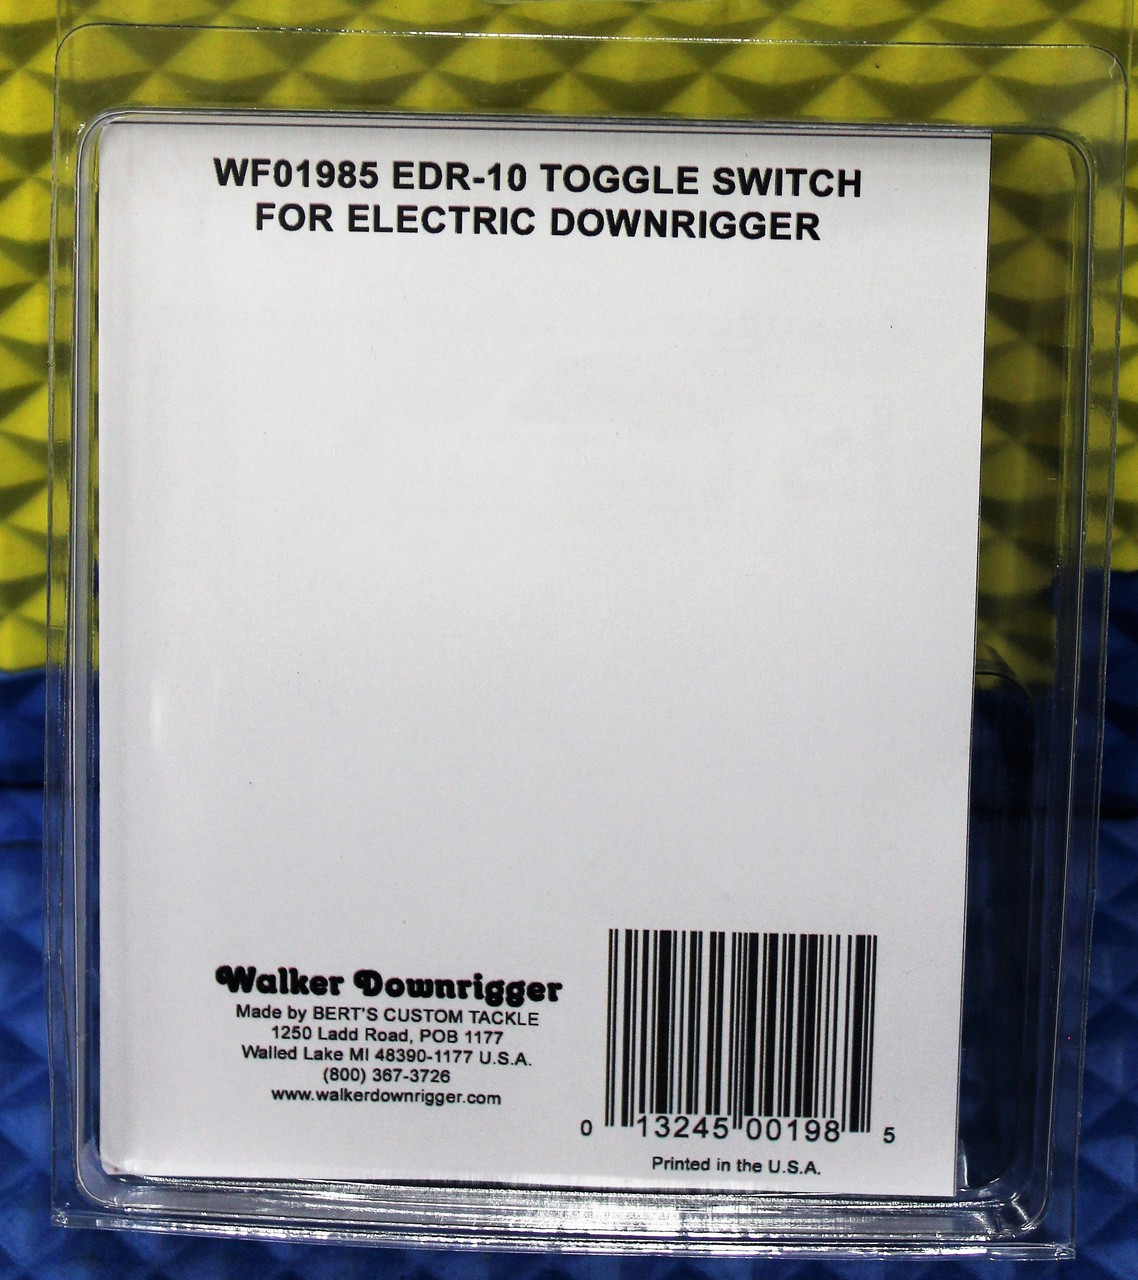  Walker Downrigger  EDR-10 Toggle Switch For Electric Downrigger By Bert's Custom Tackle WF01985